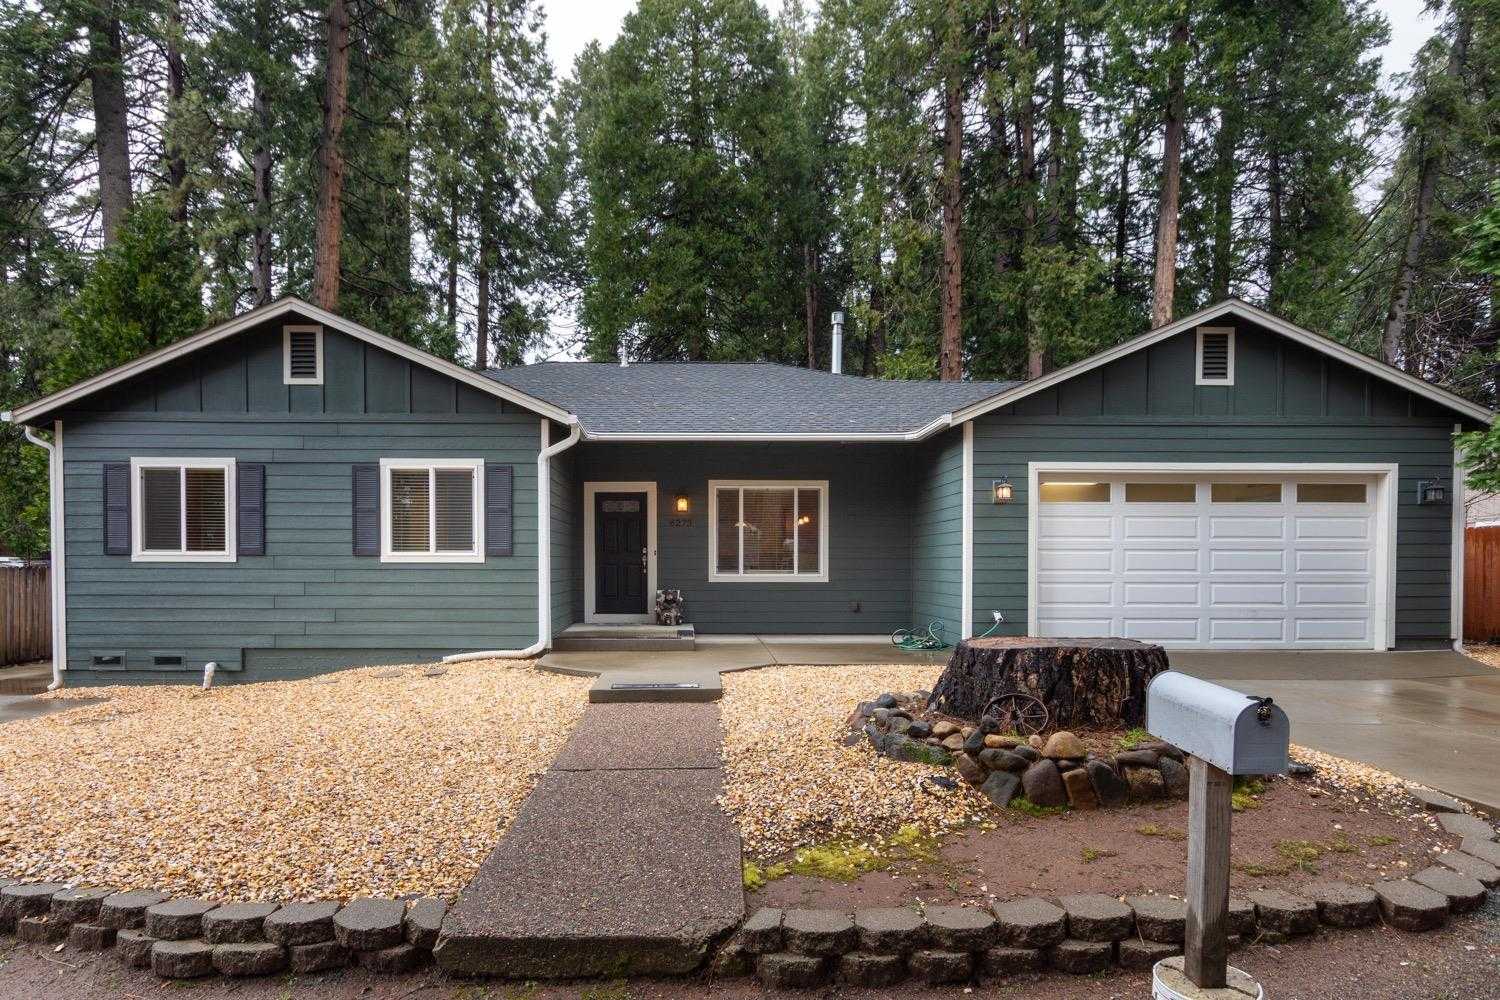 $459,000 - 3Br/2Ba -  for Sale in Pollock Pines